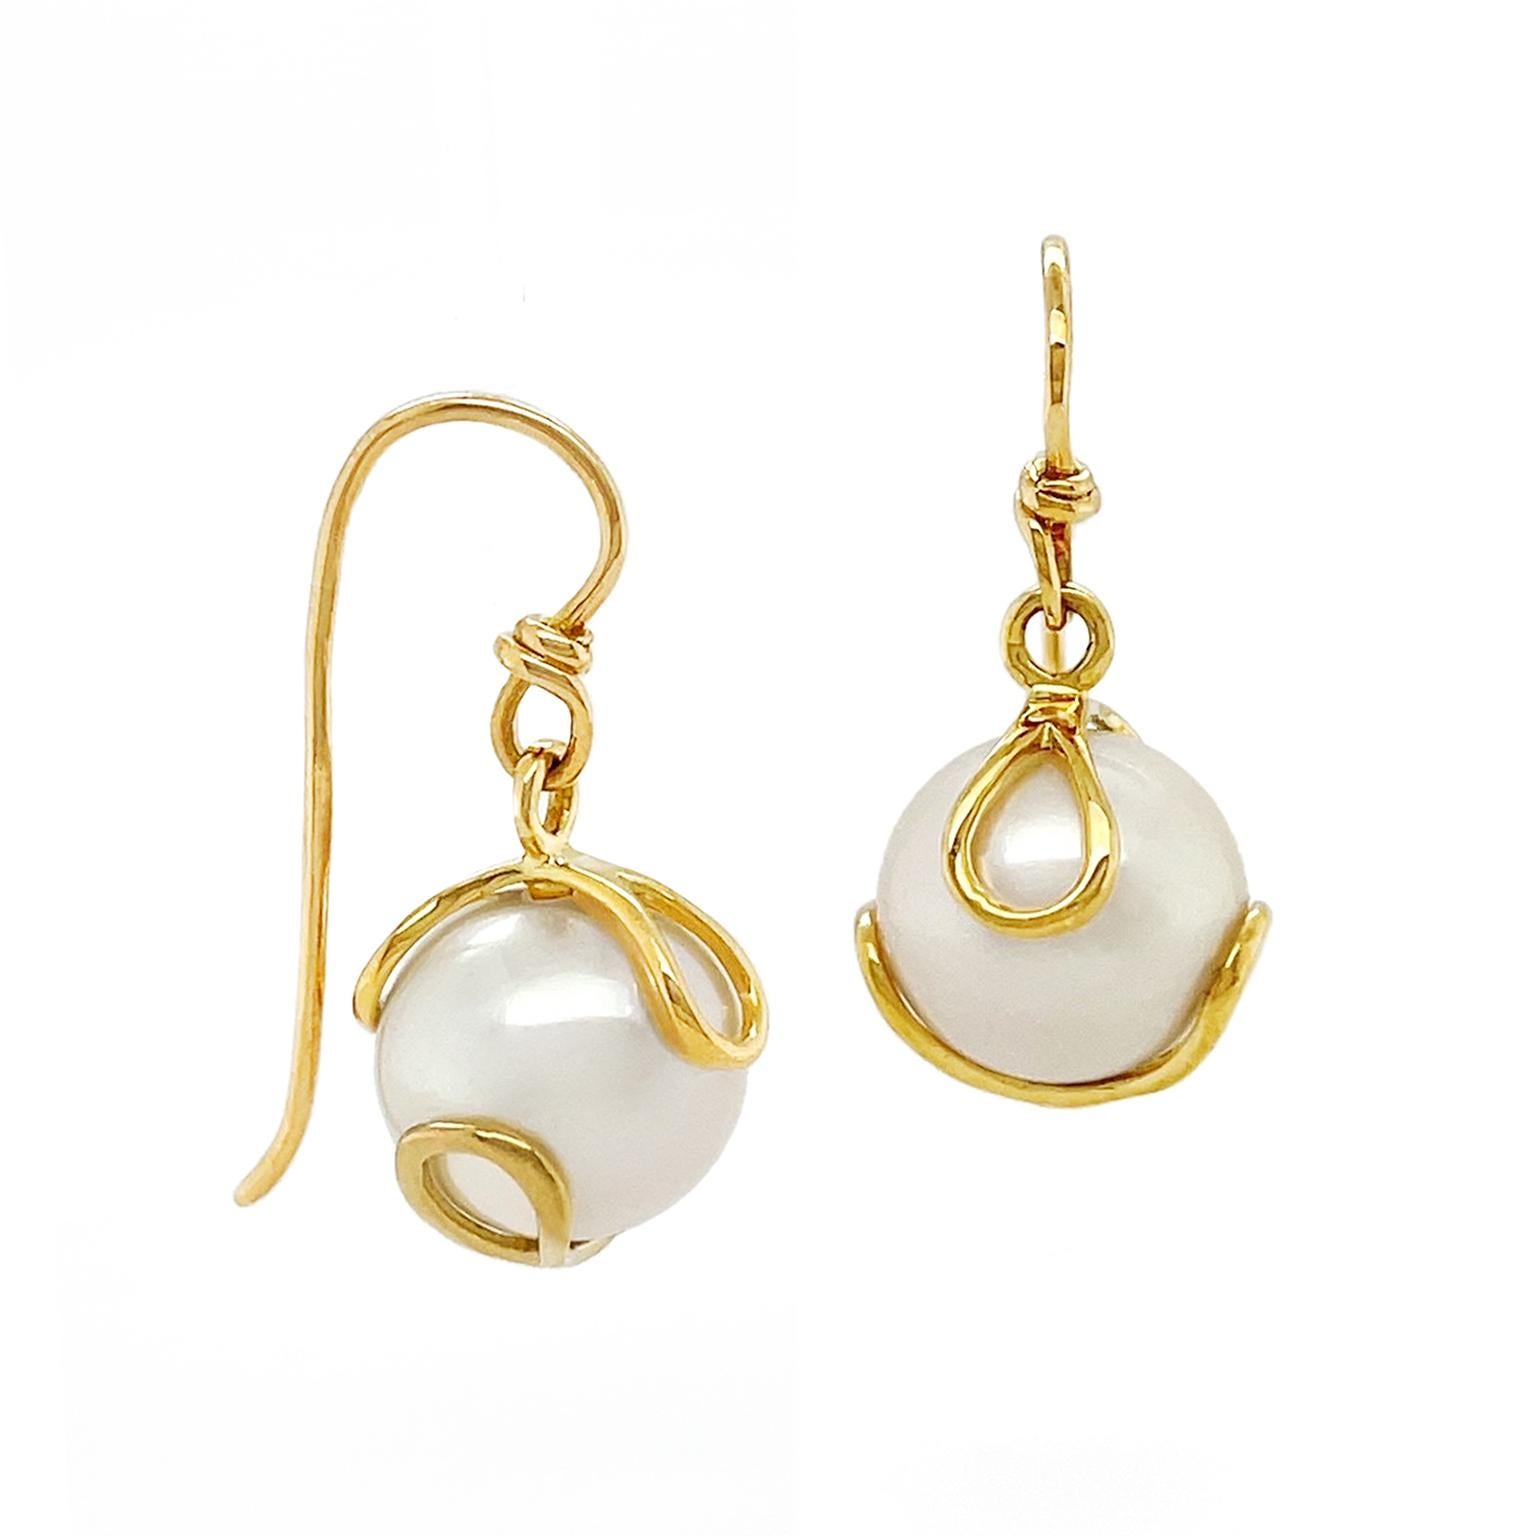 The prismatic beauty of a fresh water pearl is showcased in these earrings. 18k yellow gold loops bring warmth while sheltering the pearl, capturing the light in a variety of subtle colors. French hooks complete the earrings, which measure 0.48